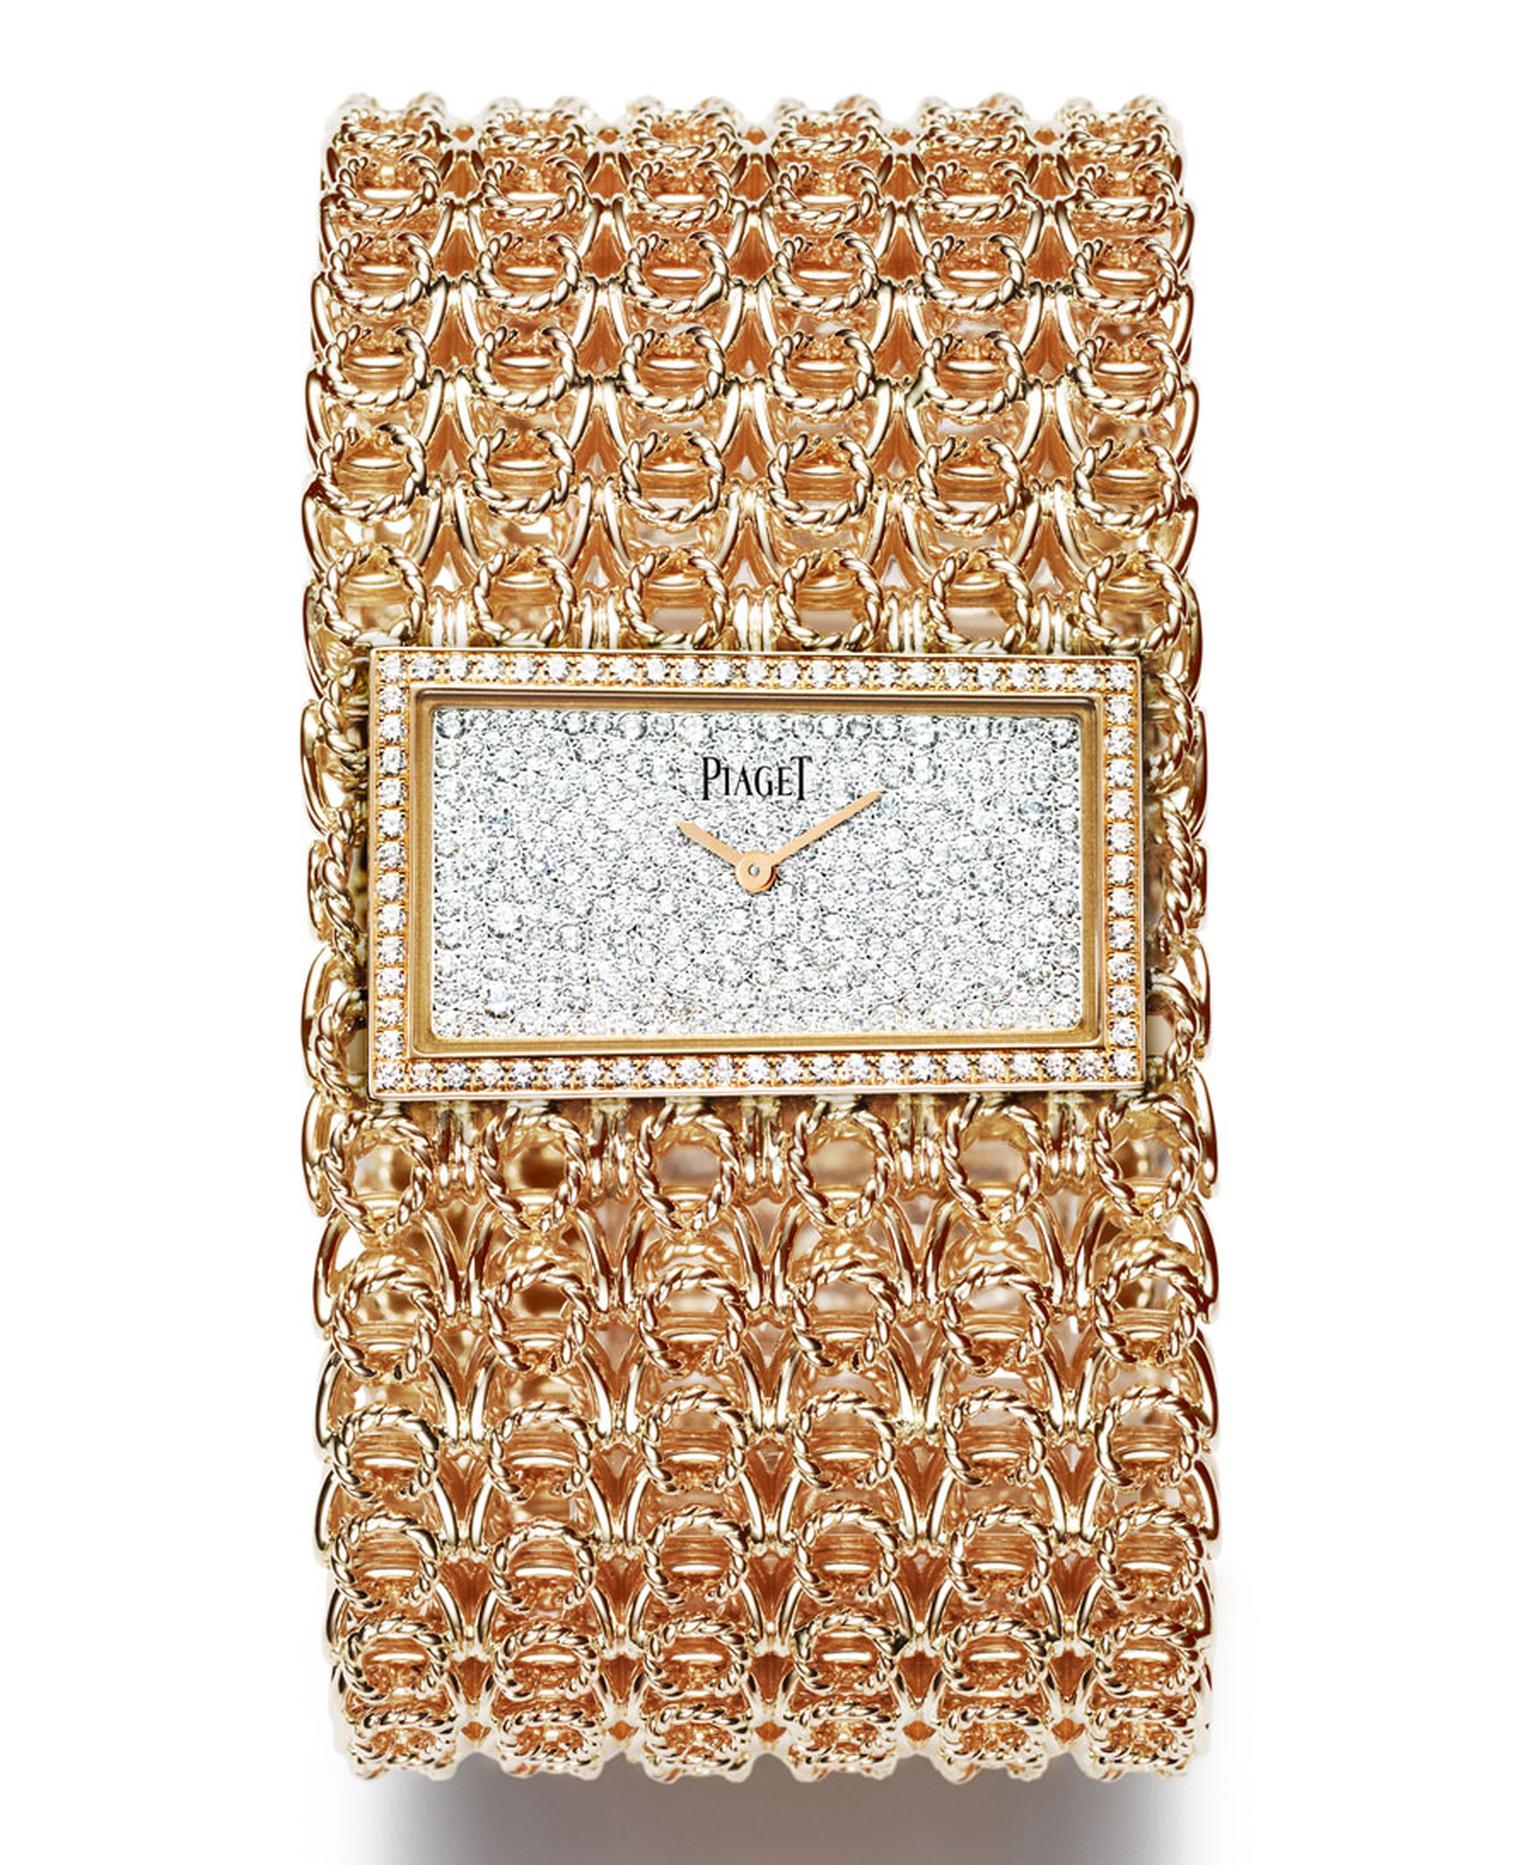 Piaget-Couture-SIHH-1.jpg